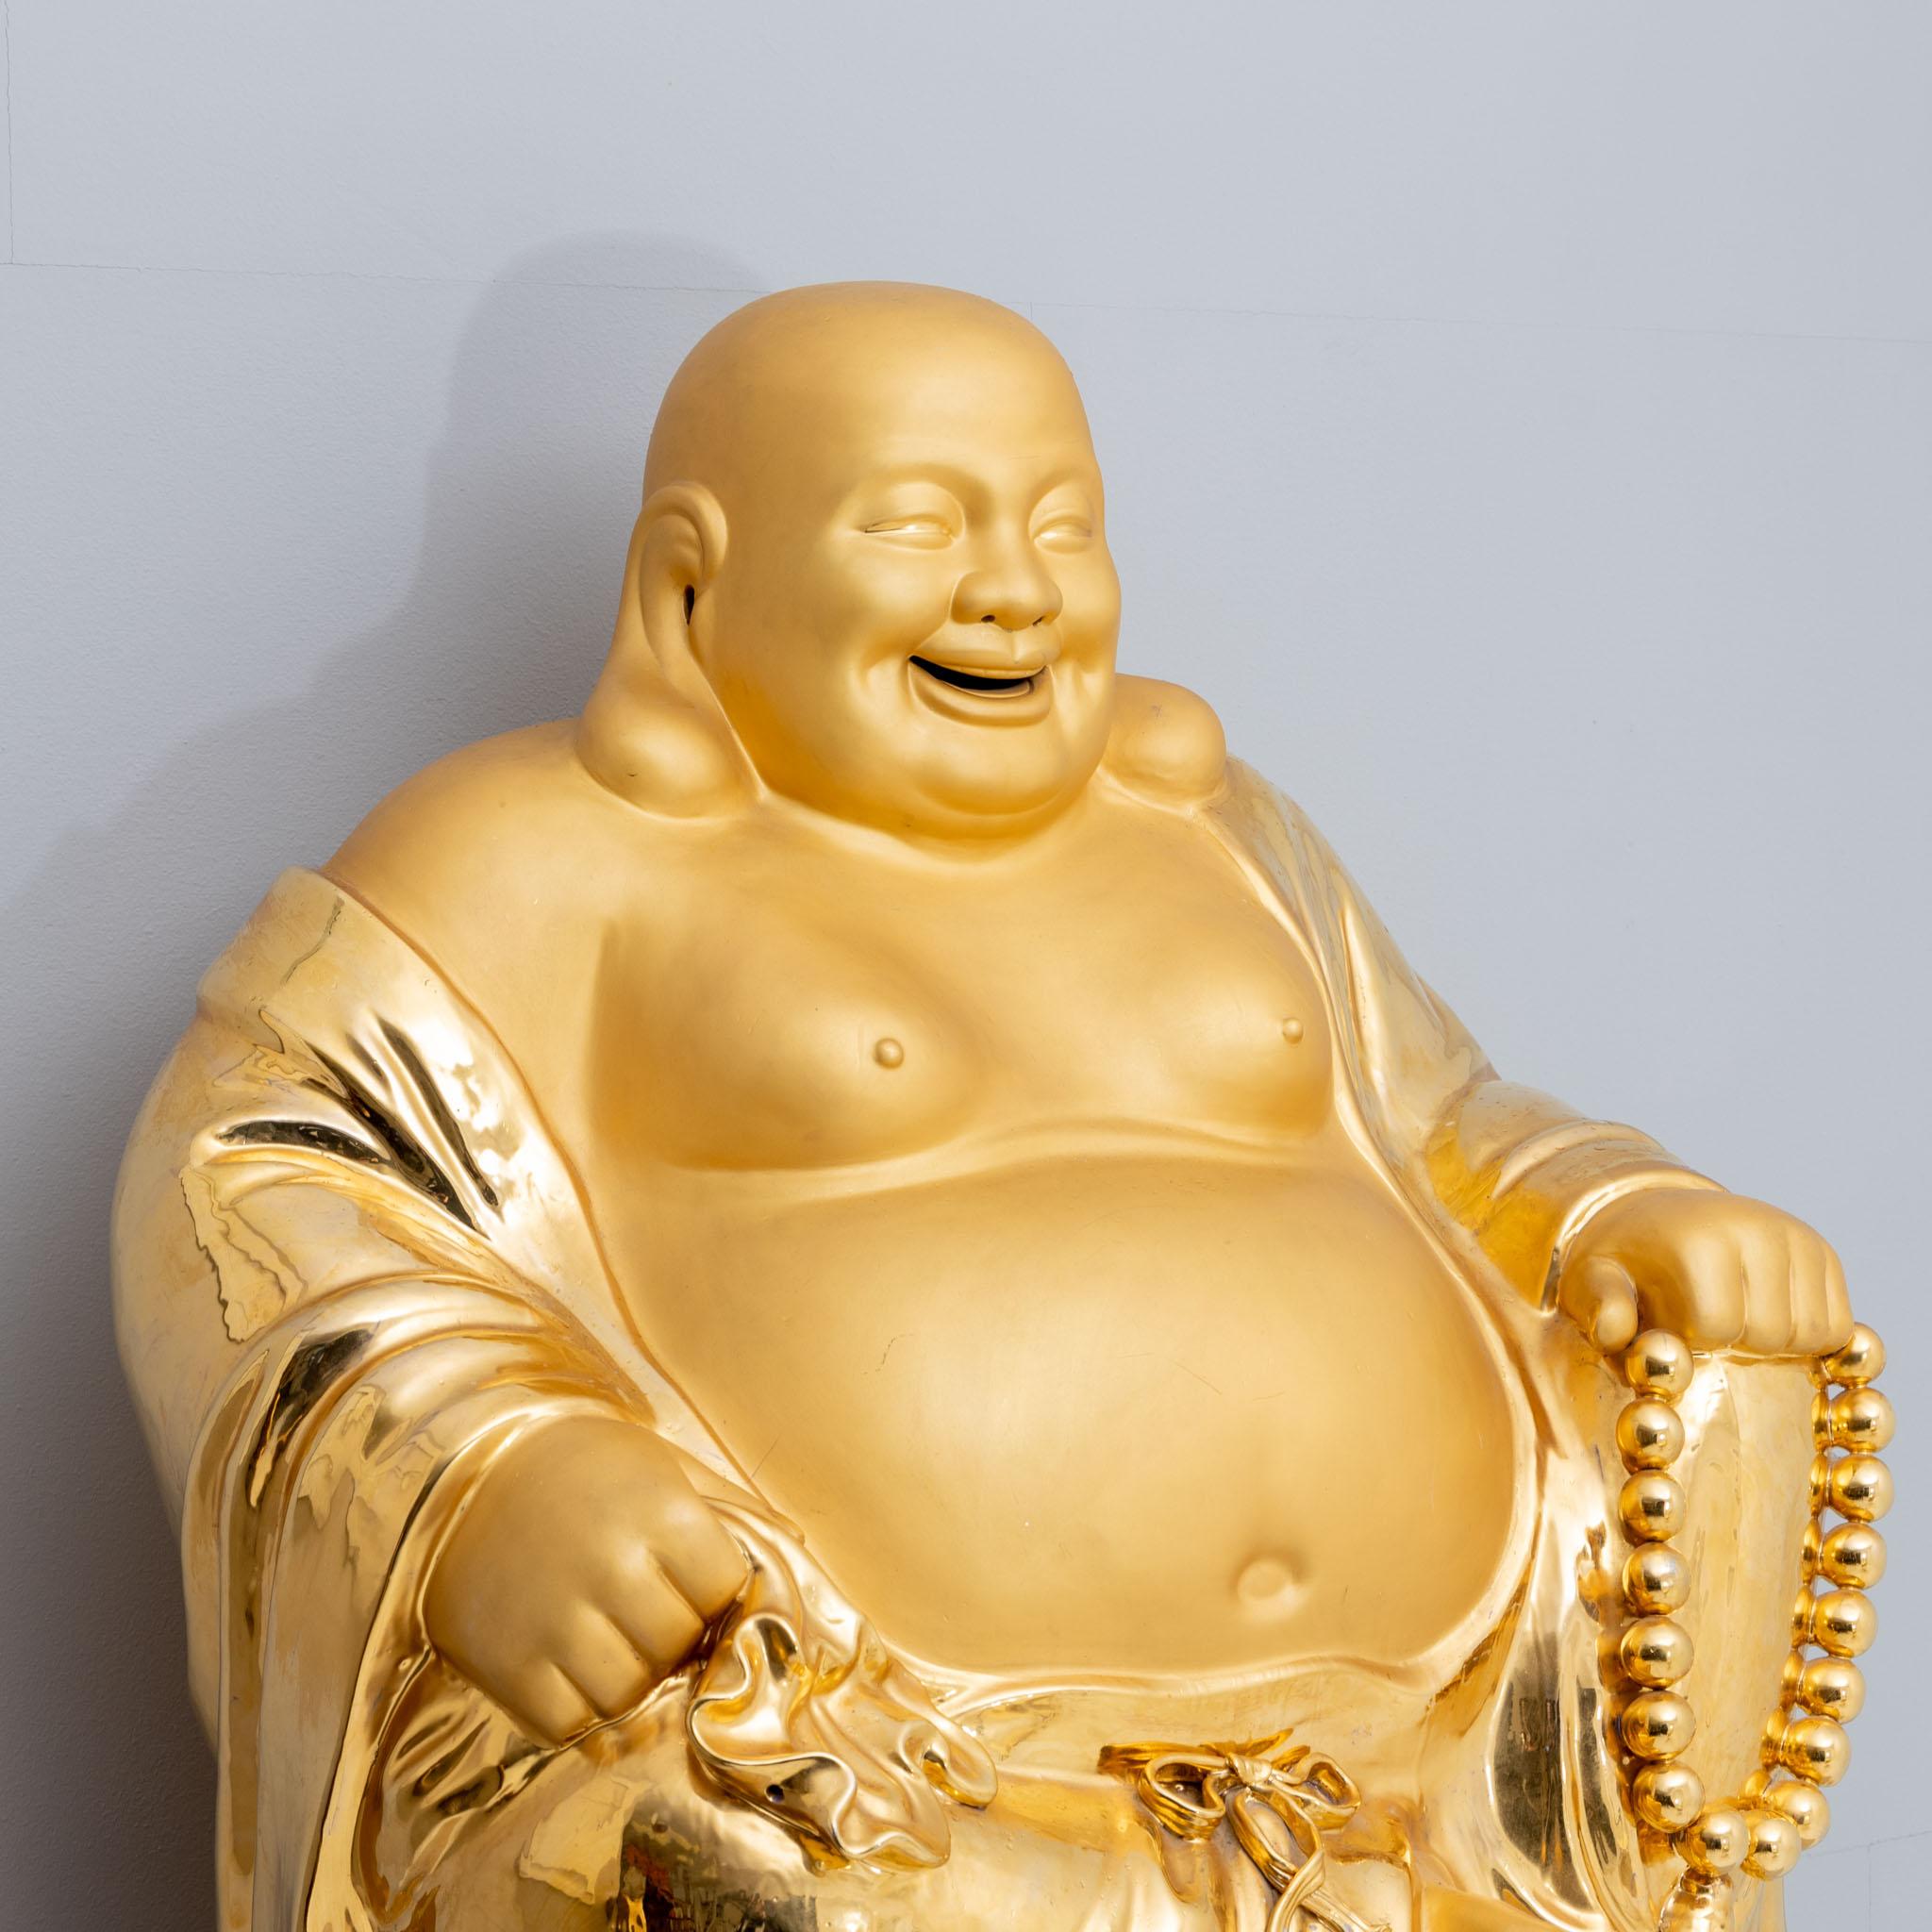 Golden Laughing Buddha Made of Porcelain, 20th Century For Sale 2